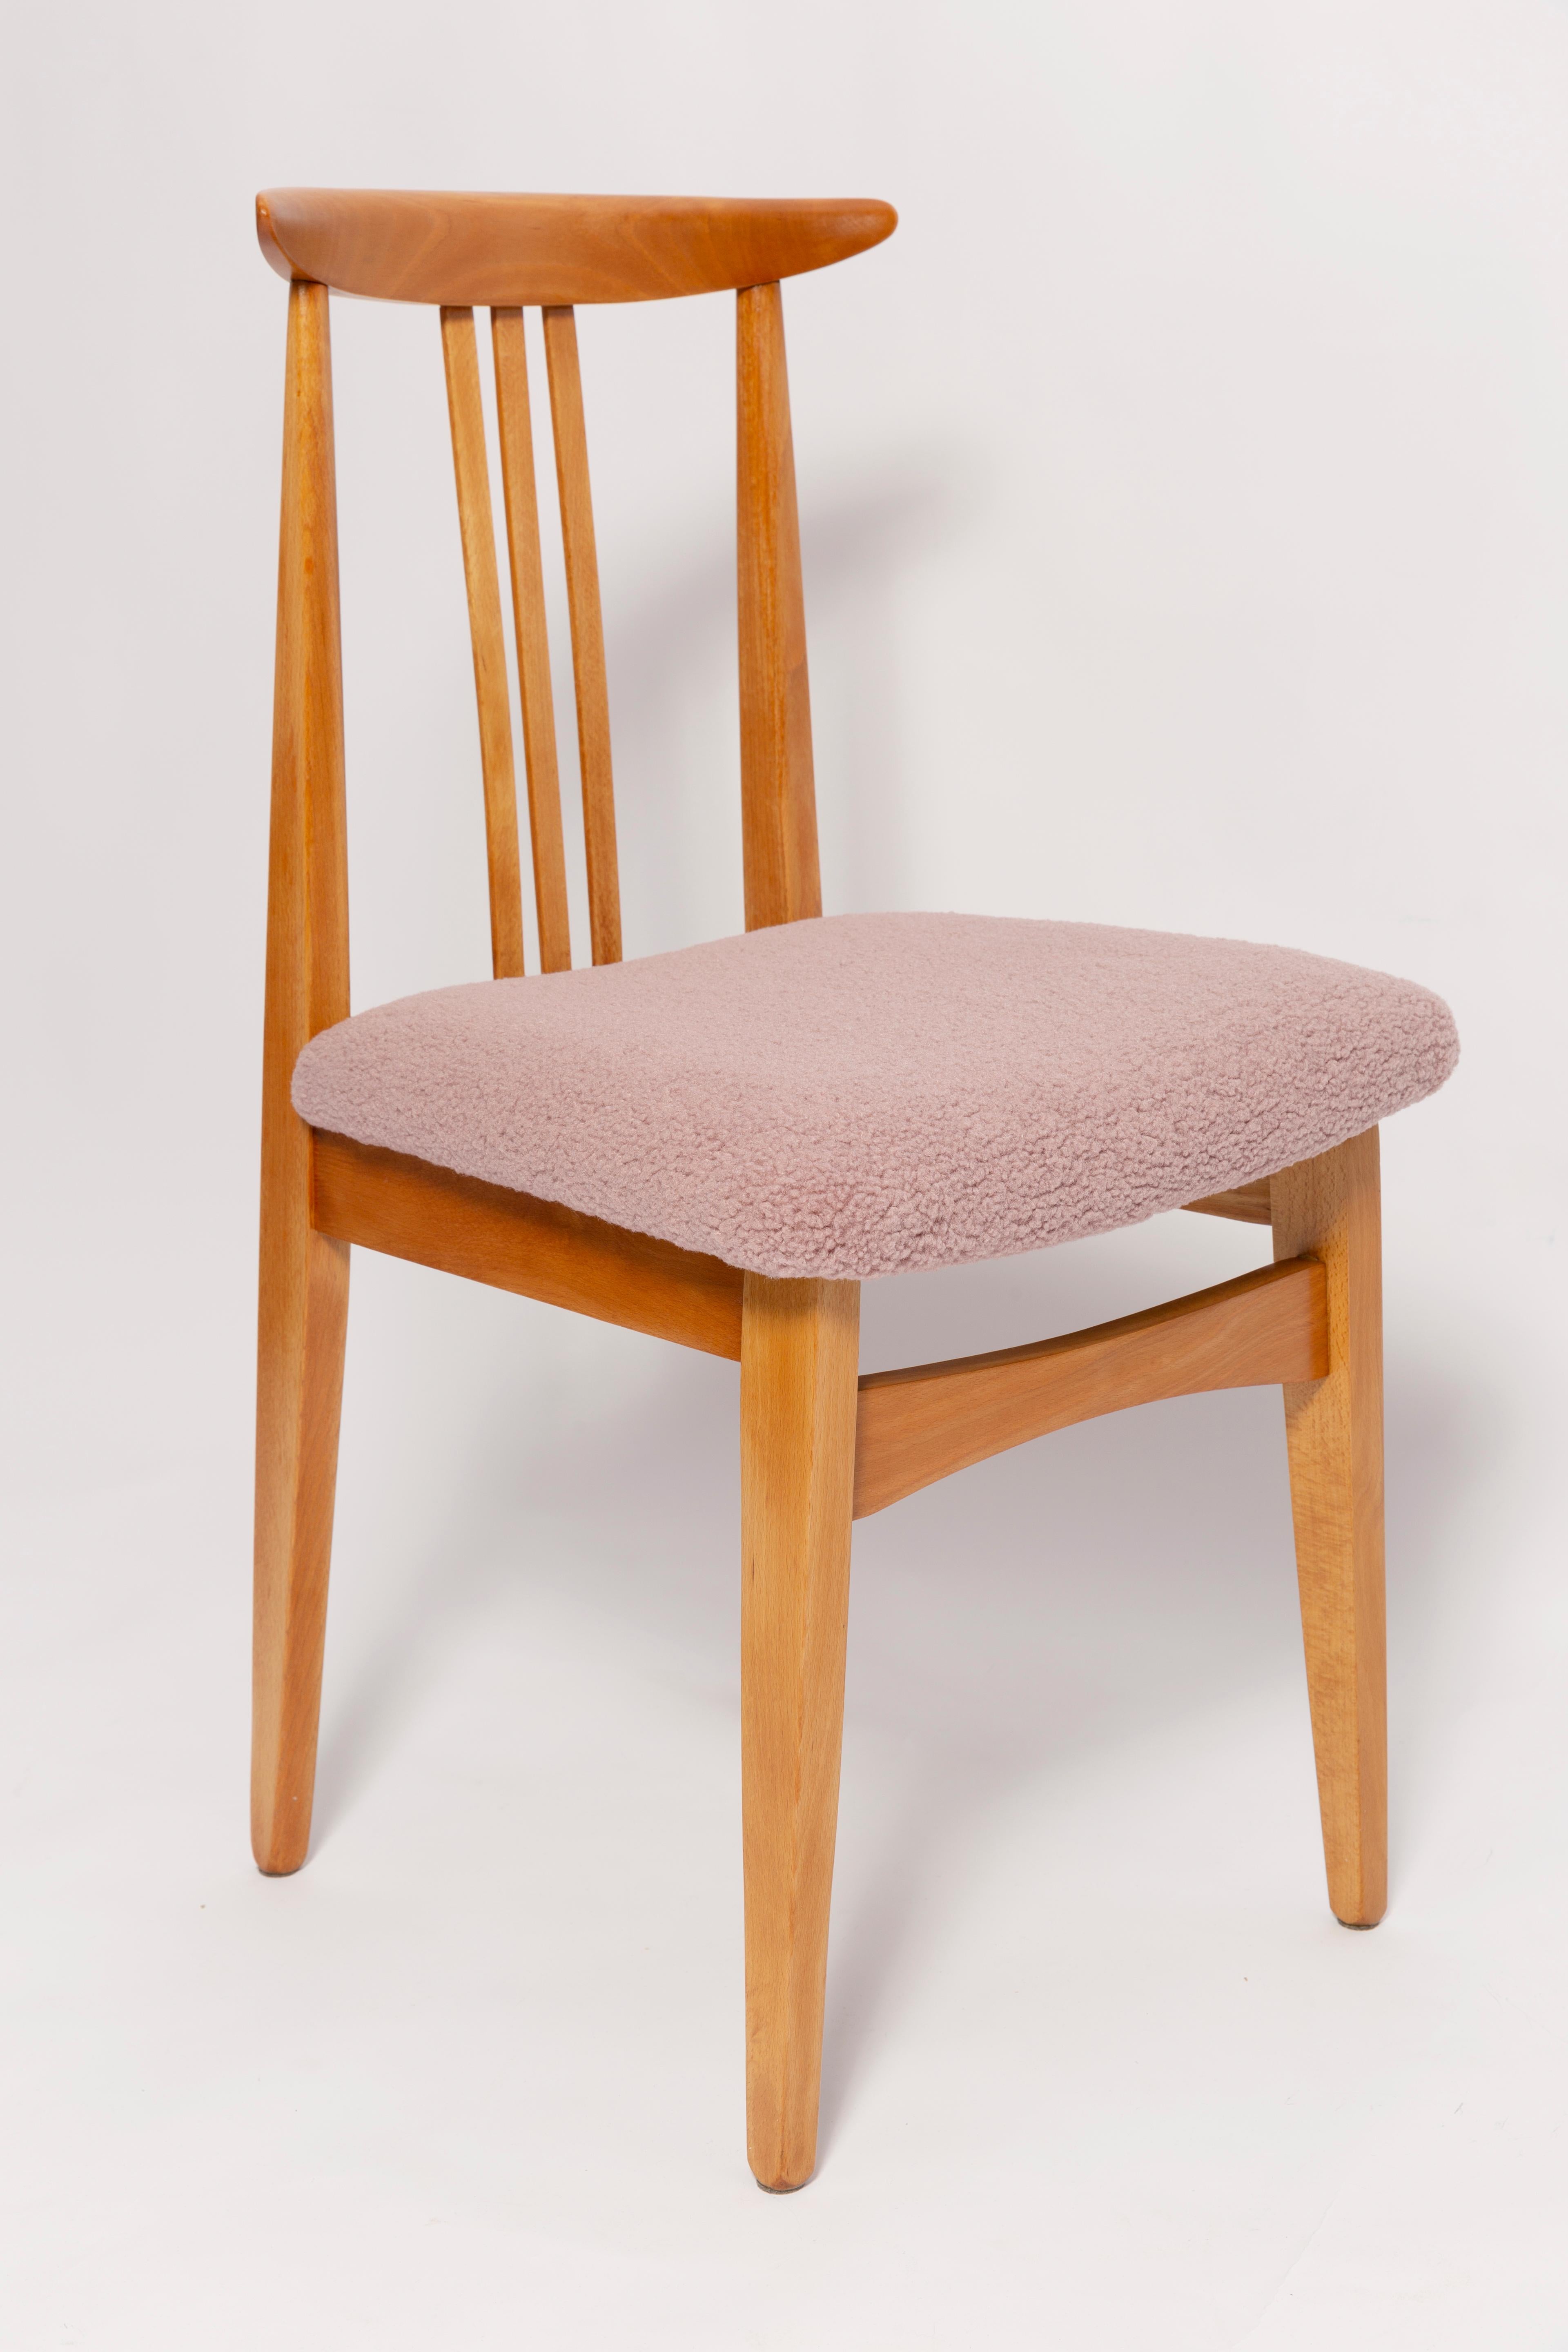 A beautiful beech chair designed by M. Zielinski, type 200 / 100B. Manufactured by the Opole Furniture Industry Center at the end of the 1960s in Poland. The chair is after undergone a complete carpentry and upholstery renovation. Seats covered with